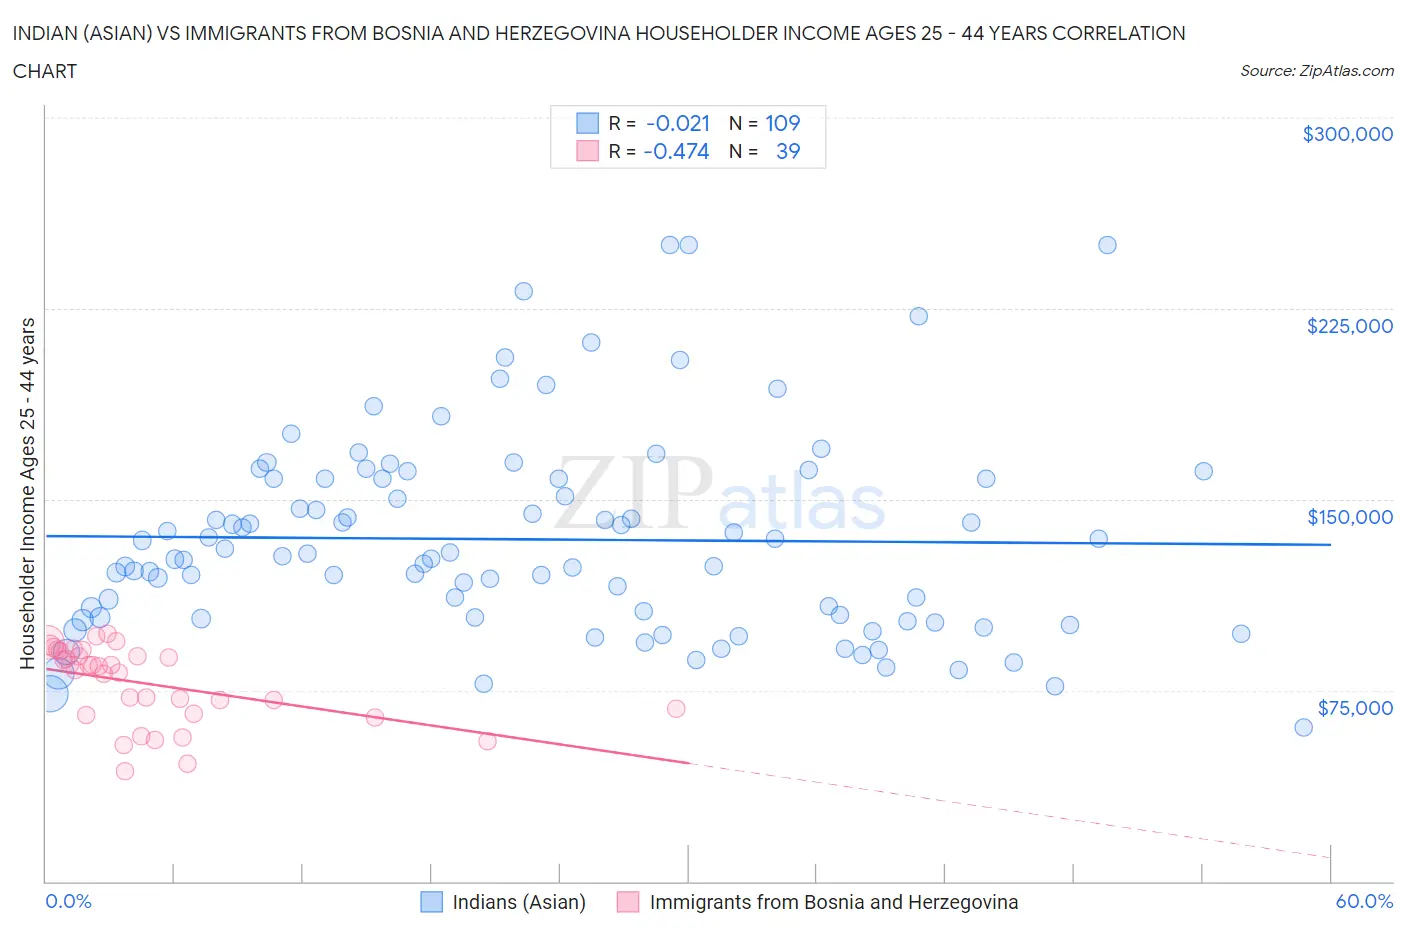 Indian (Asian) vs Immigrants from Bosnia and Herzegovina Householder Income Ages 25 - 44 years